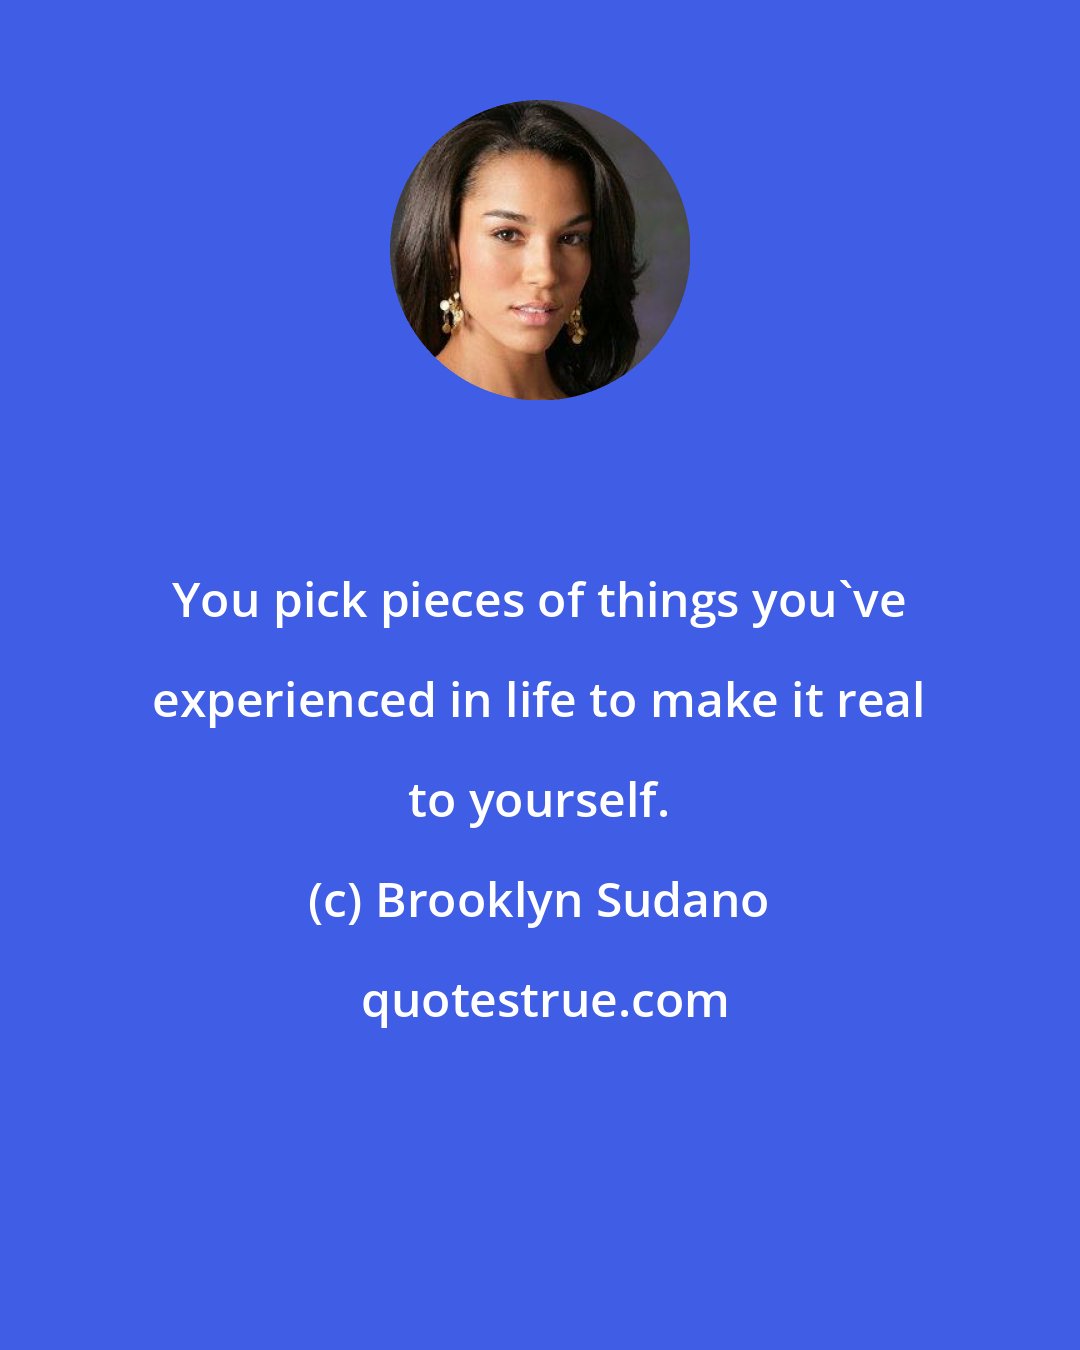 Brooklyn Sudano: You pick pieces of things you've experienced in life to make it real to yourself.